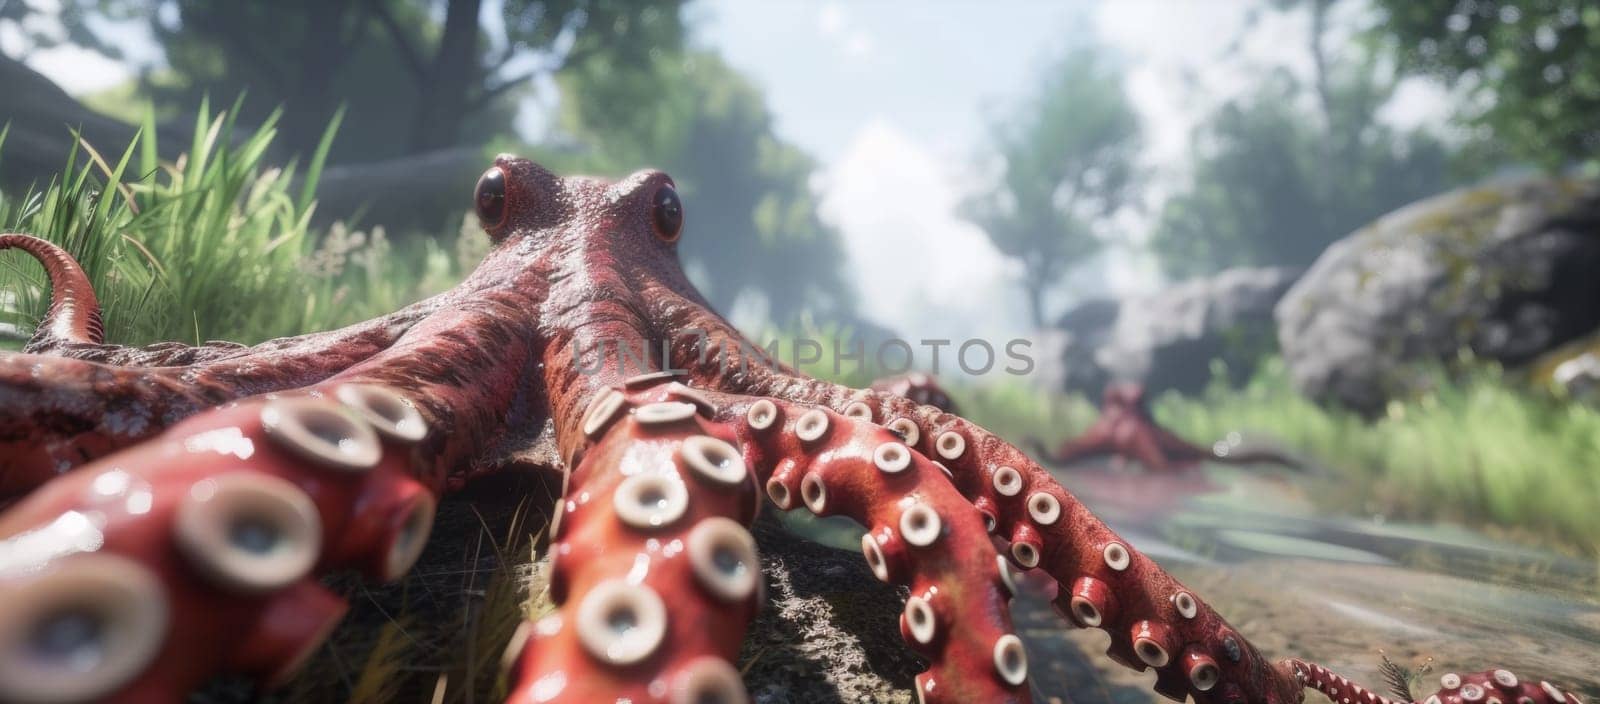 A close up of an octopus with many tentacles on the ground